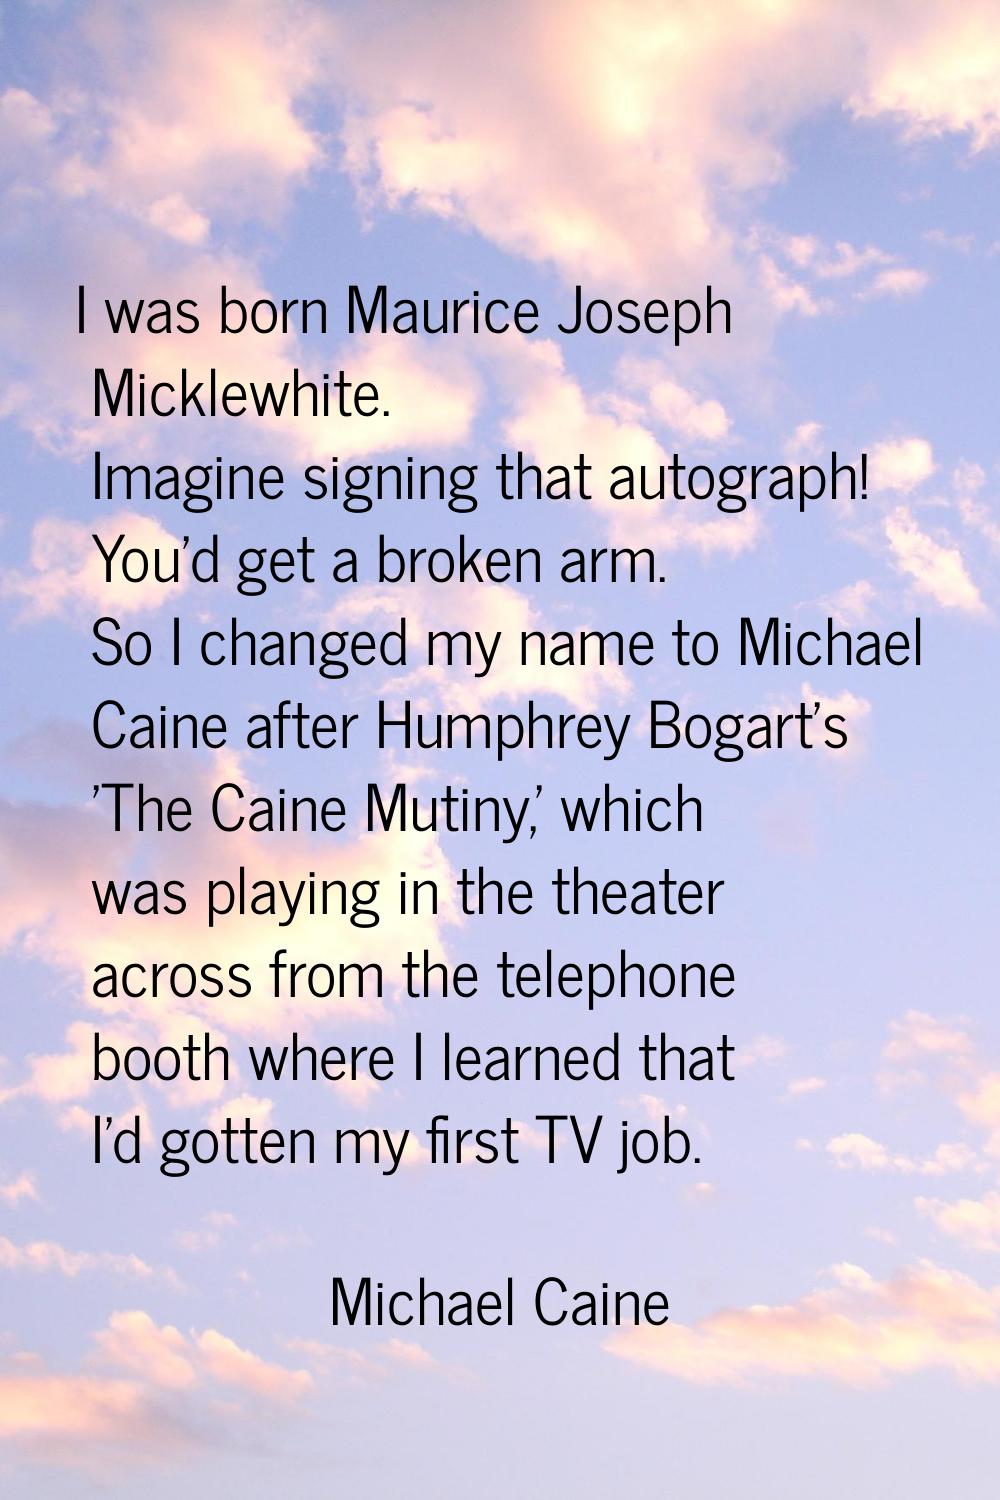 I was born Maurice Joseph Micklewhite. Imagine signing that autograph! You'd get a broken arm. So I